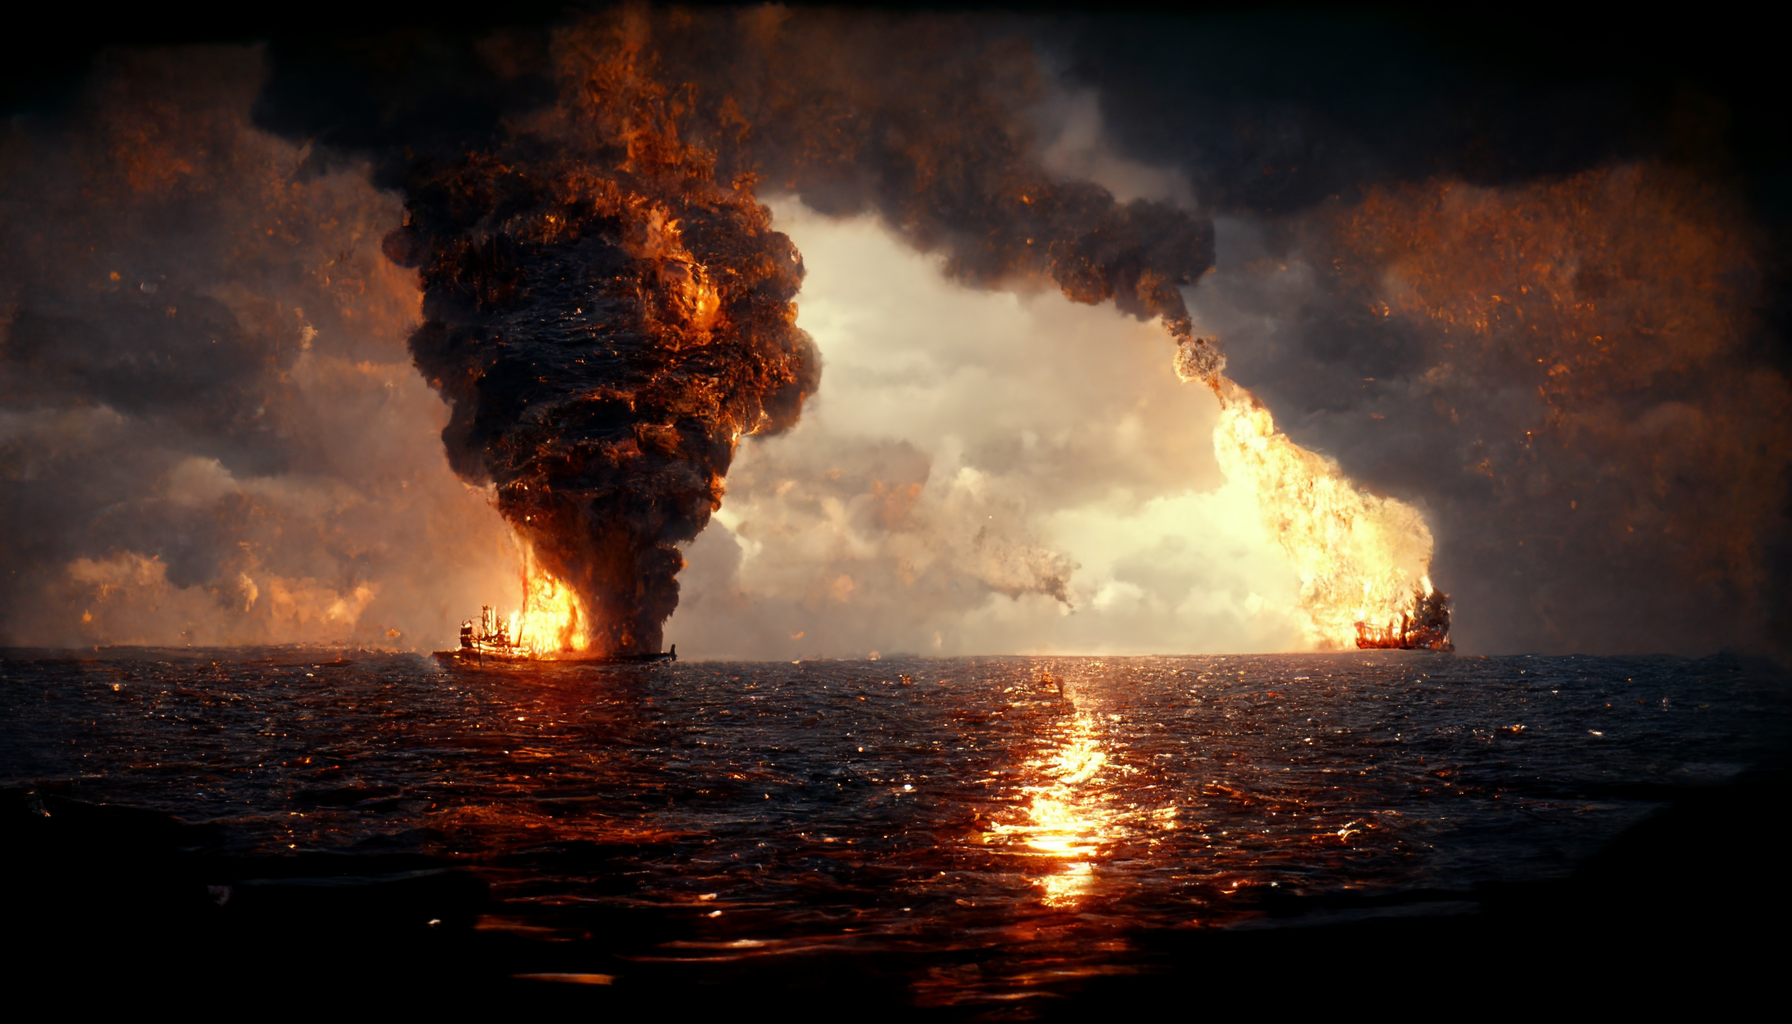 mattlee_A_mysterious_flame_seen_over_the_seas_cinematic_realist_50482388-eea8-4a2b-a305-0744bd72b916